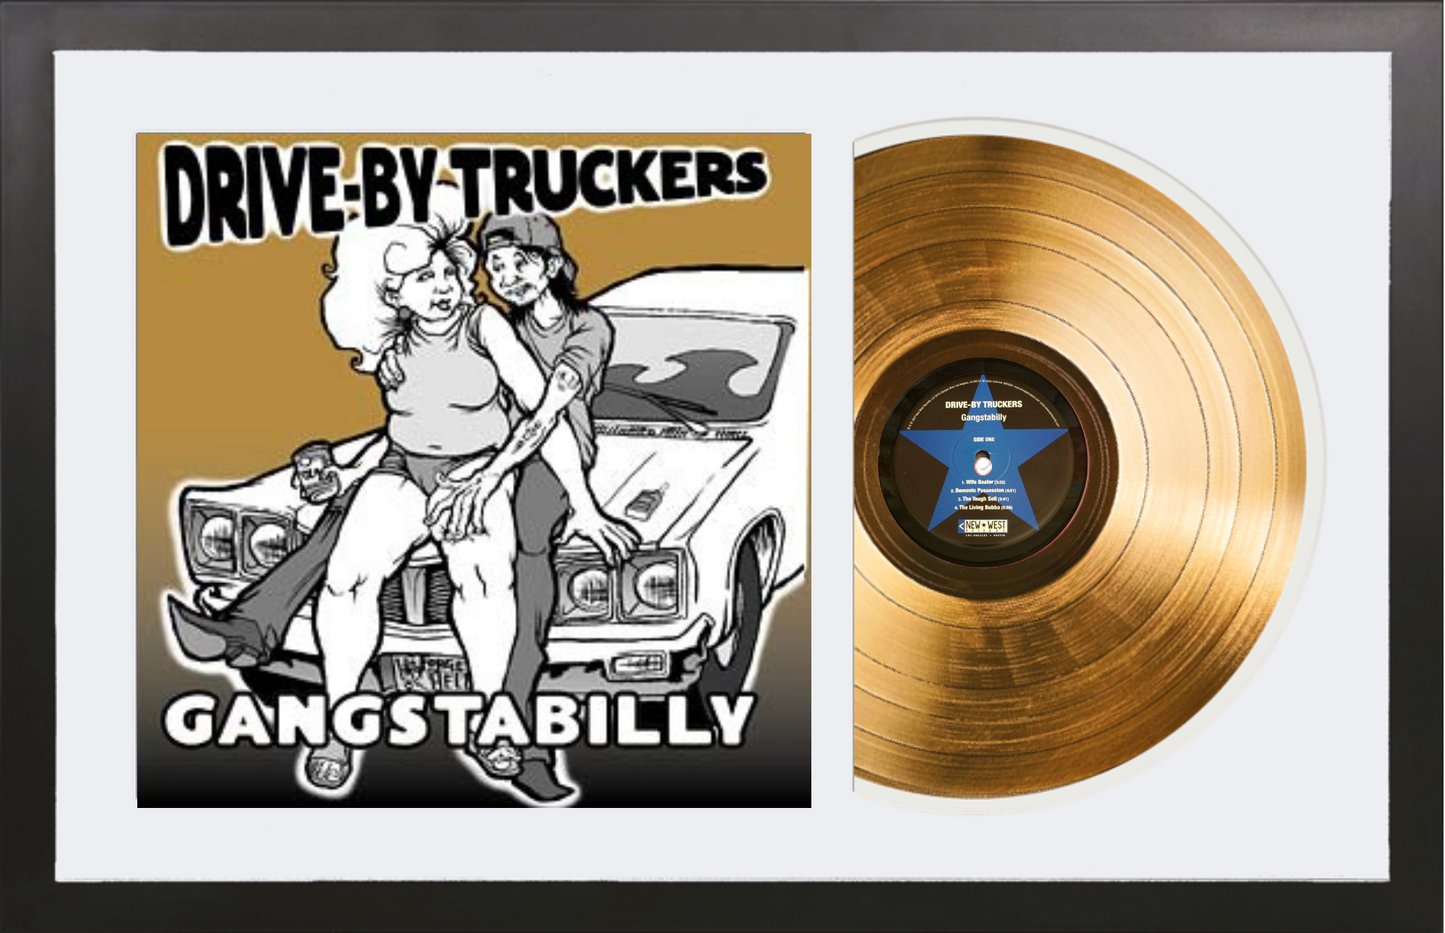 Drive-By Truckers - Gangstabilly - 14K Gold Plated Vinyl